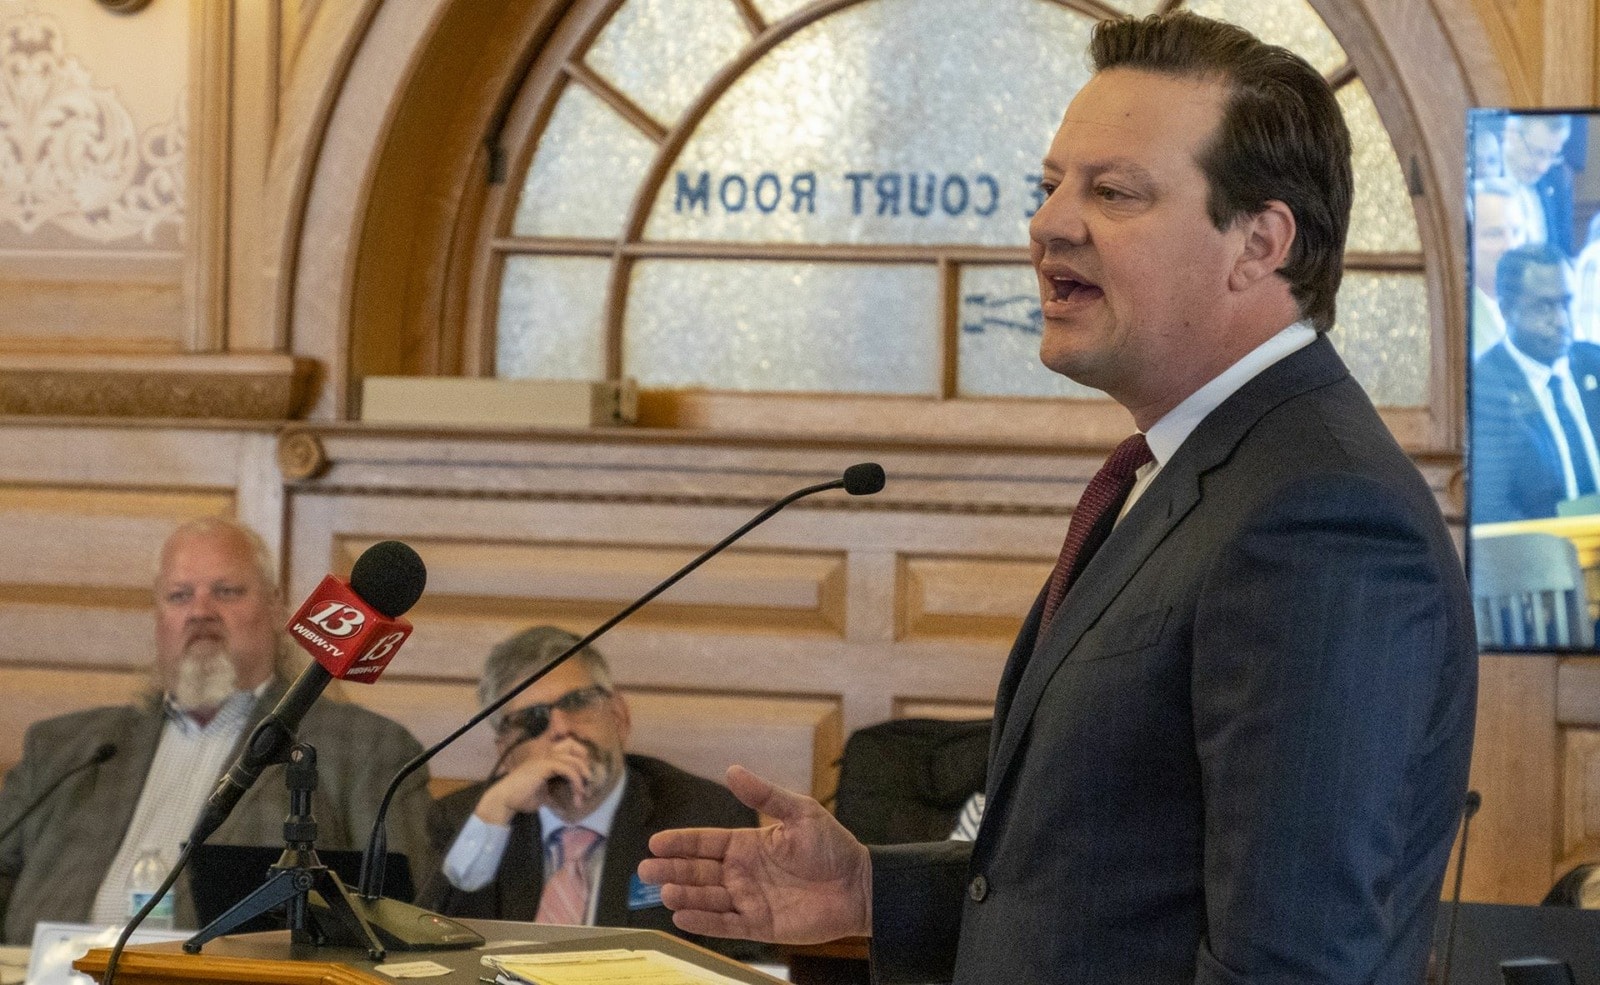 Representing the Kansas City Chiefs, Korb Maxwell urges the Kansas Legislature to expand an economic incentive program to lure the team from Missouri.